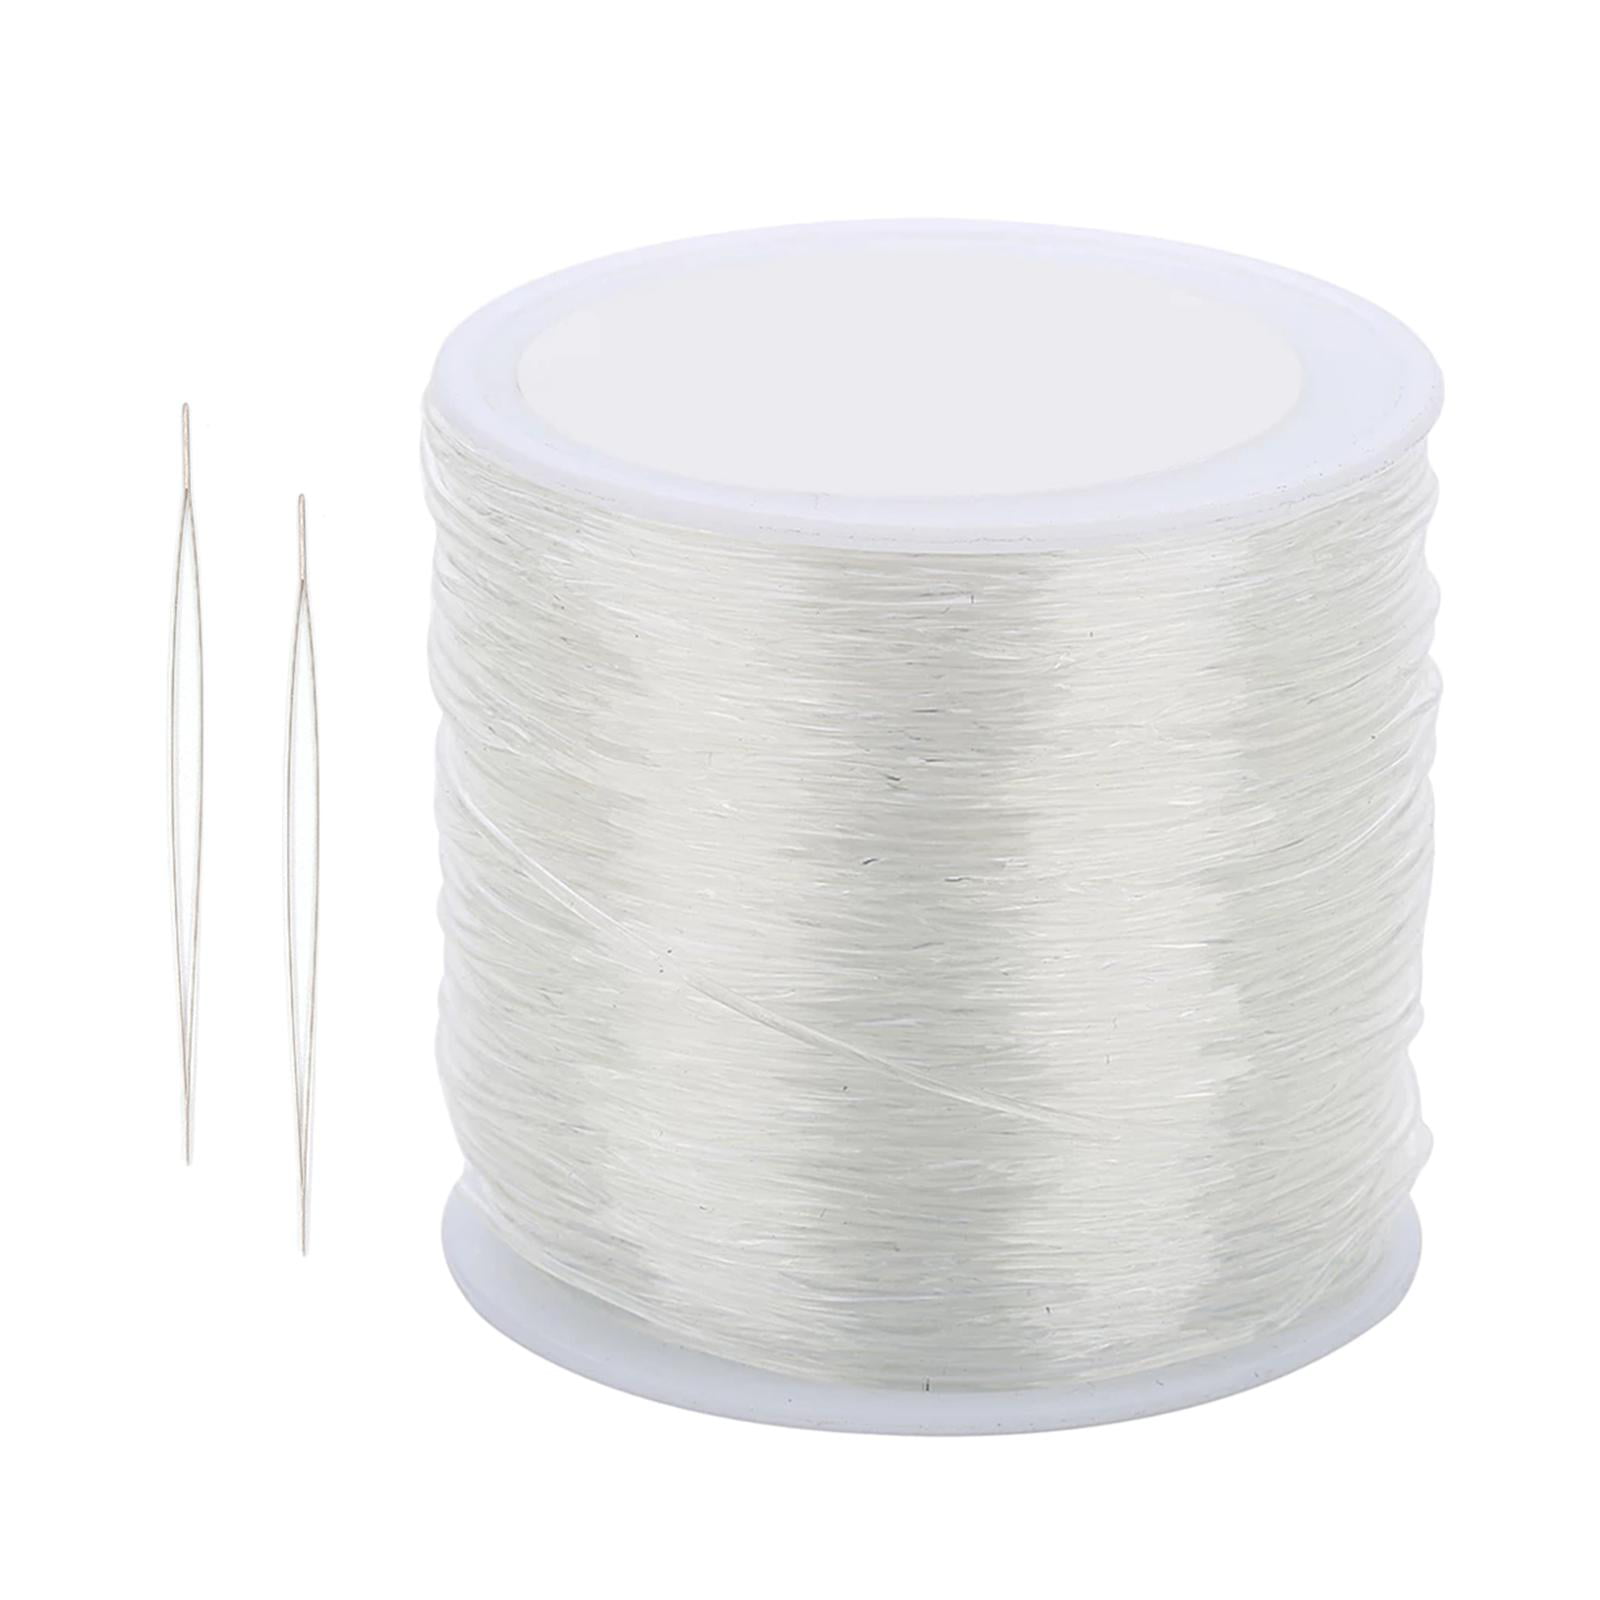 Elastic Stringing Threads Jewelery Making String Stretch Polyester Cord for Wristbands and Crafts 0.8mm 100m Clear Elastic Line